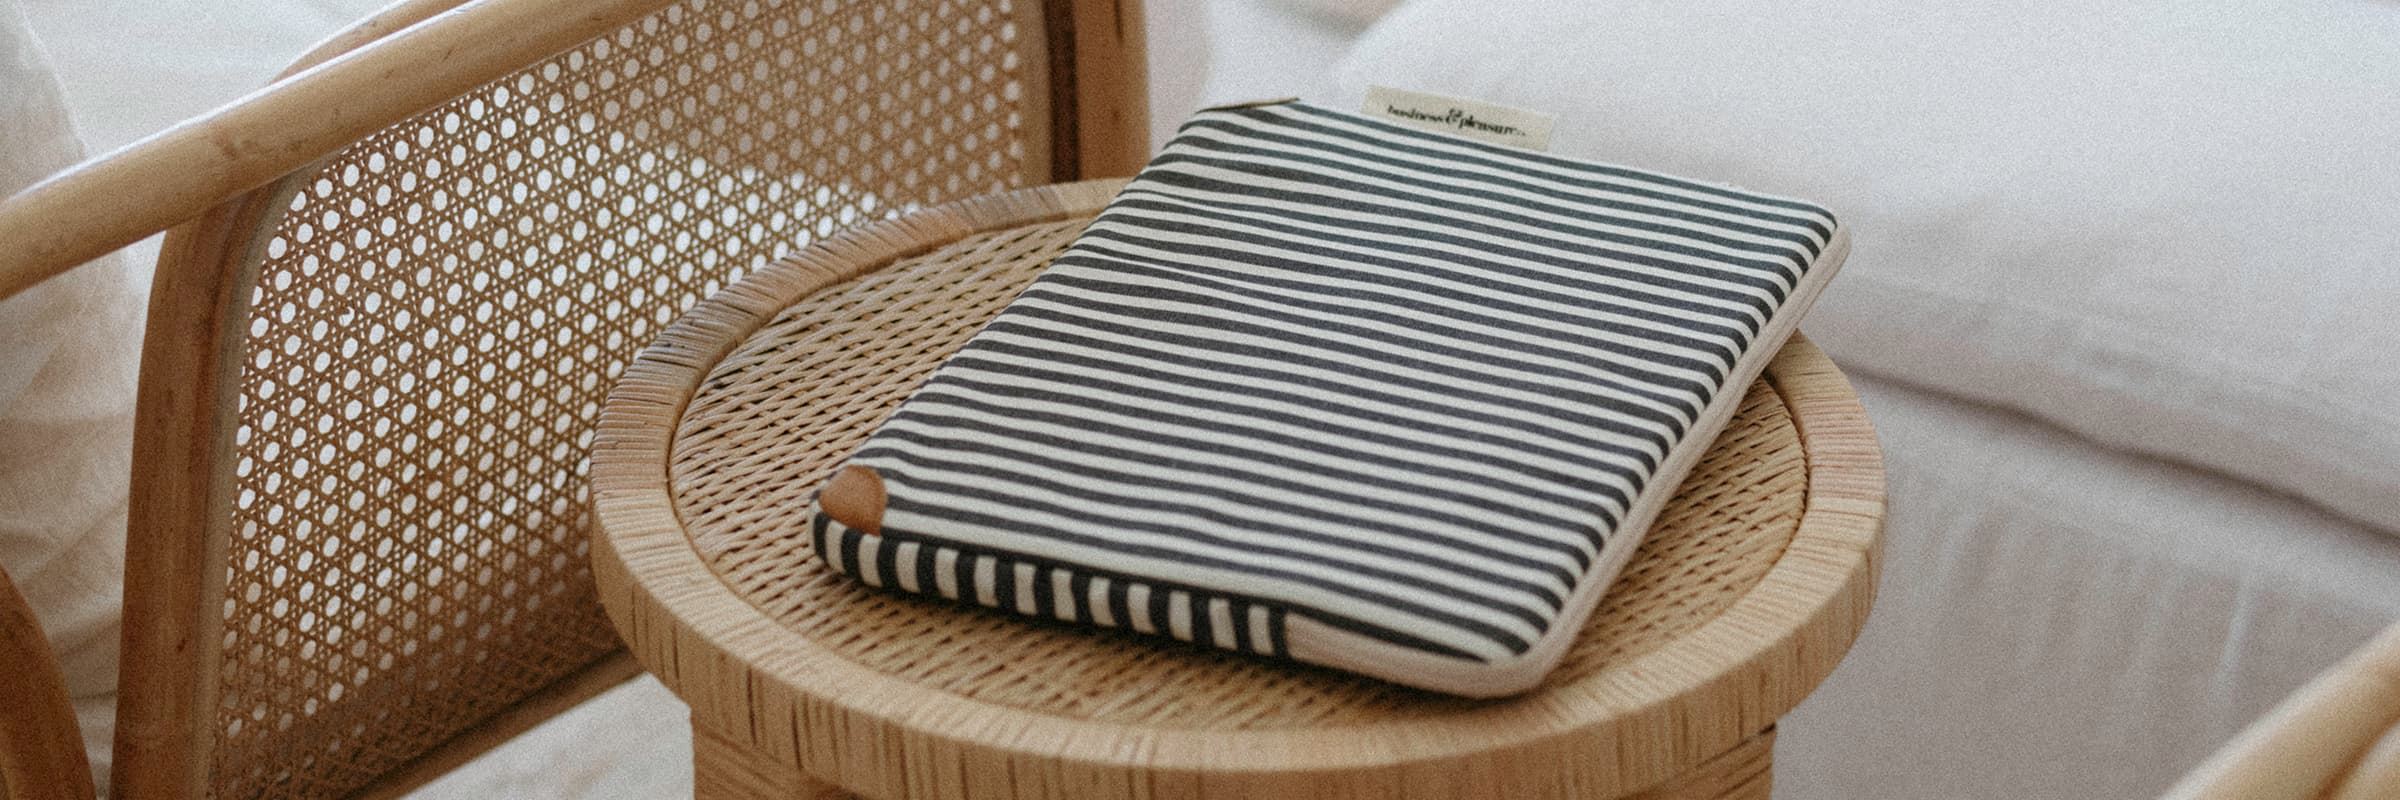 navy striped laptop case on a rattan side table in a living room